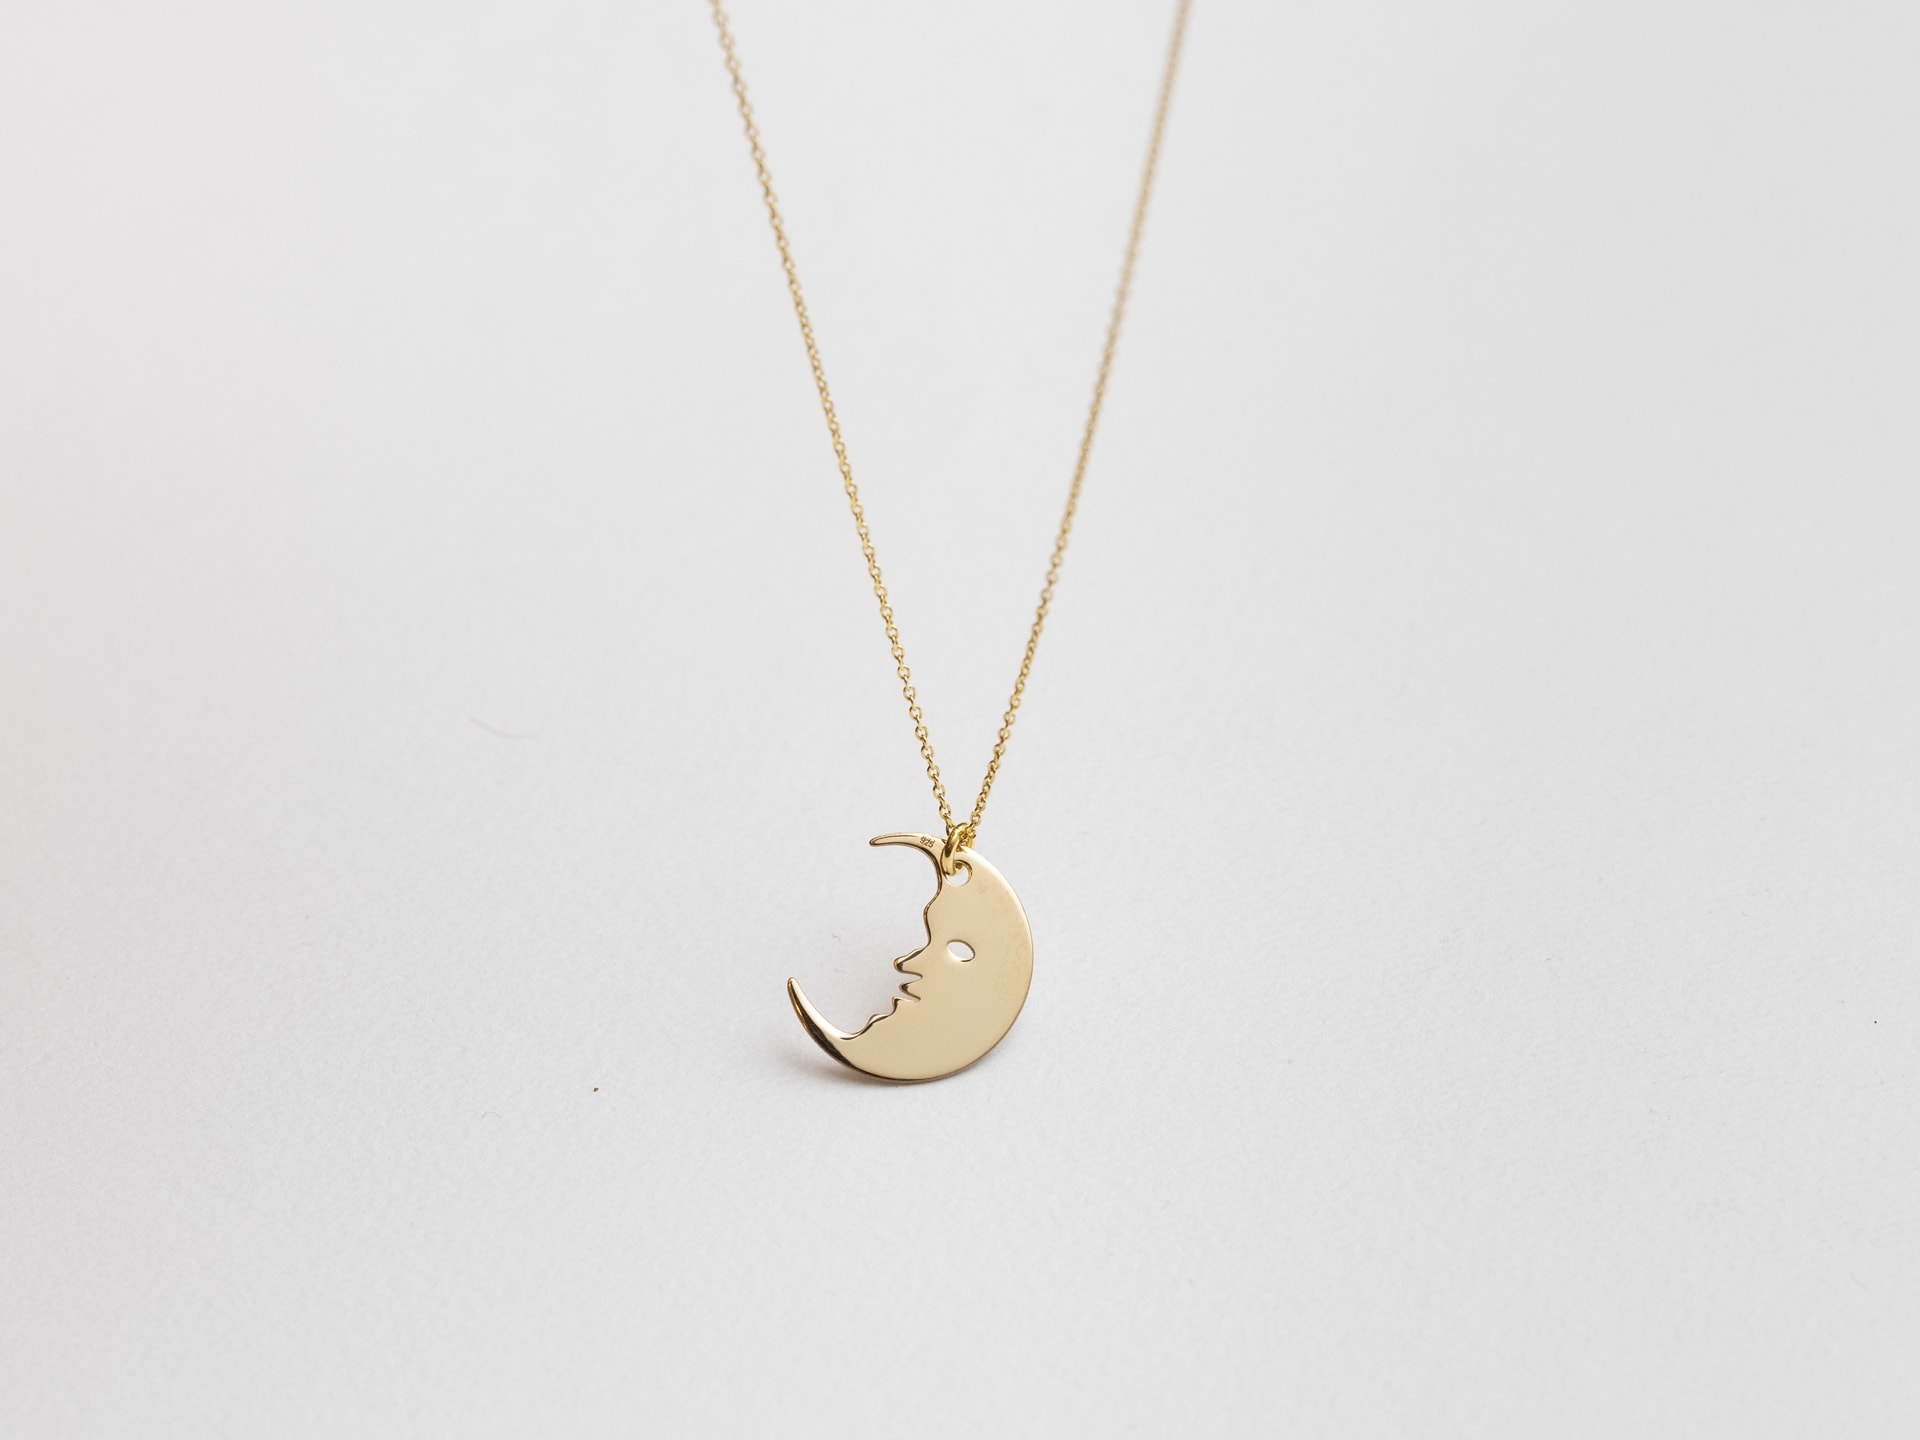 Necklace with moon , pendant of the year 2024 by Margarita Myrogianni.